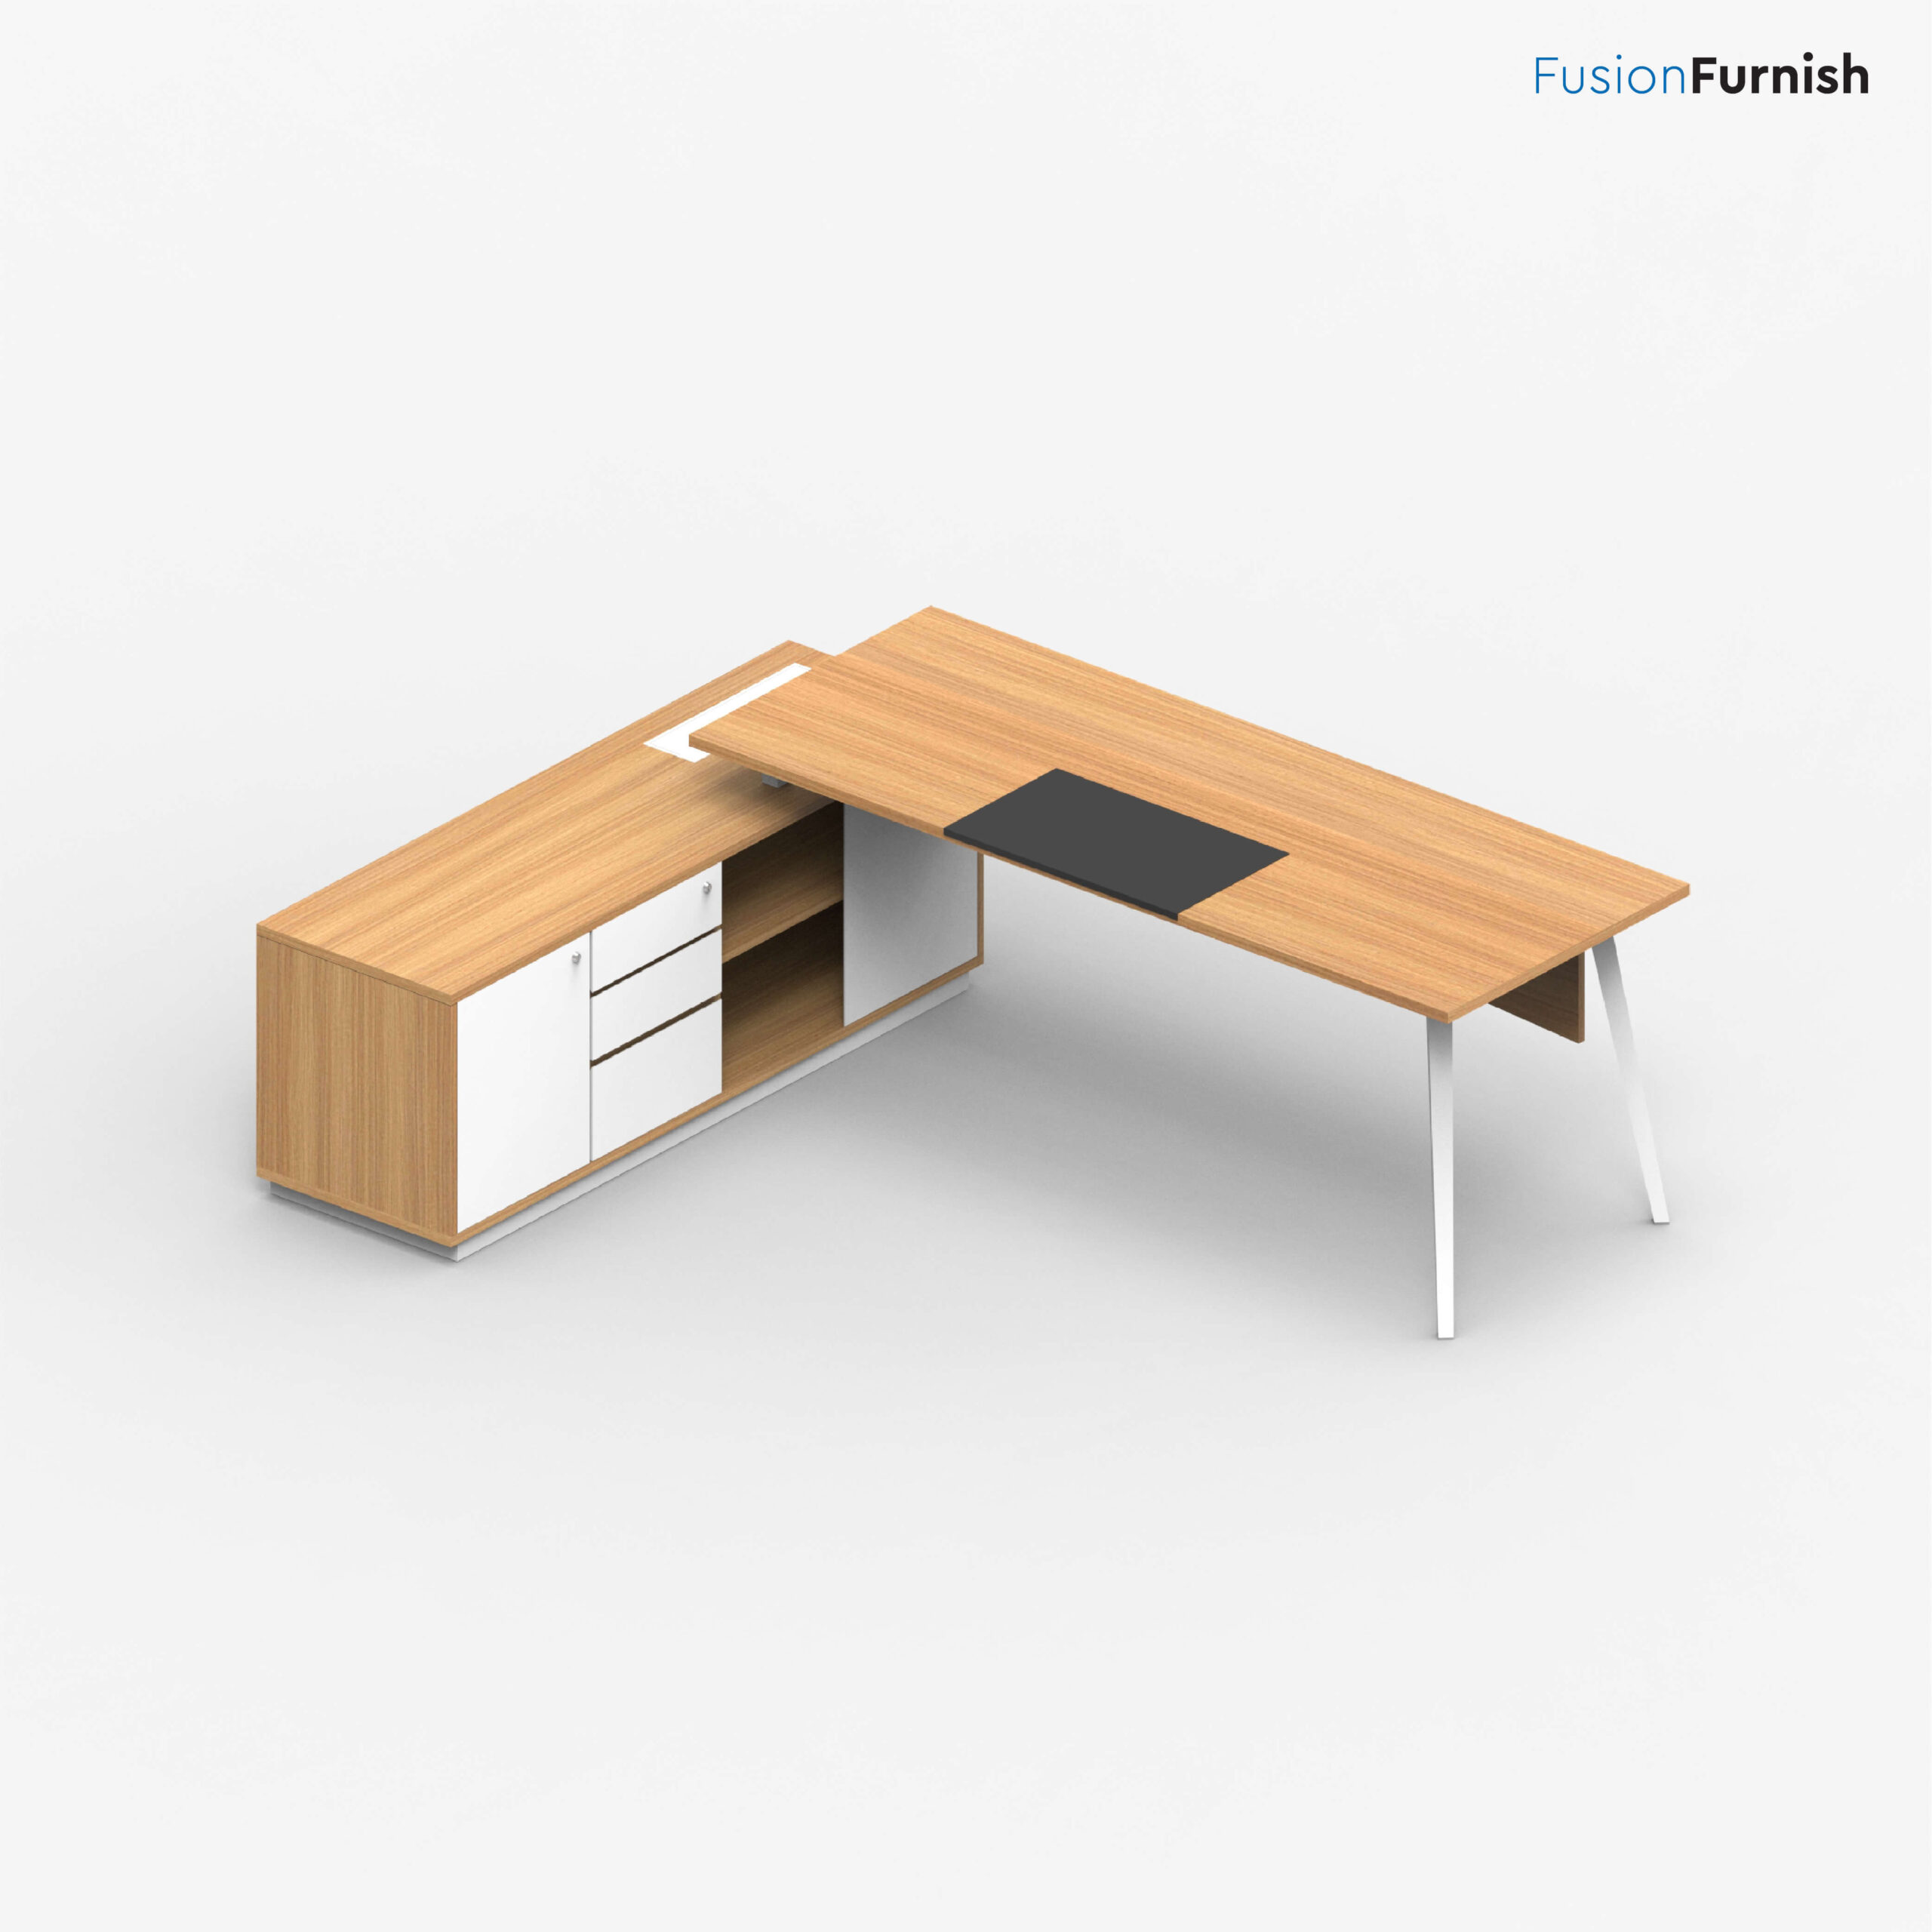 MARVELSleek, minimalist and contemporary - Marvel executive desk is the perfect solution for any office space. The rich material vocabulary enables it to create a visually appealing office landscape.